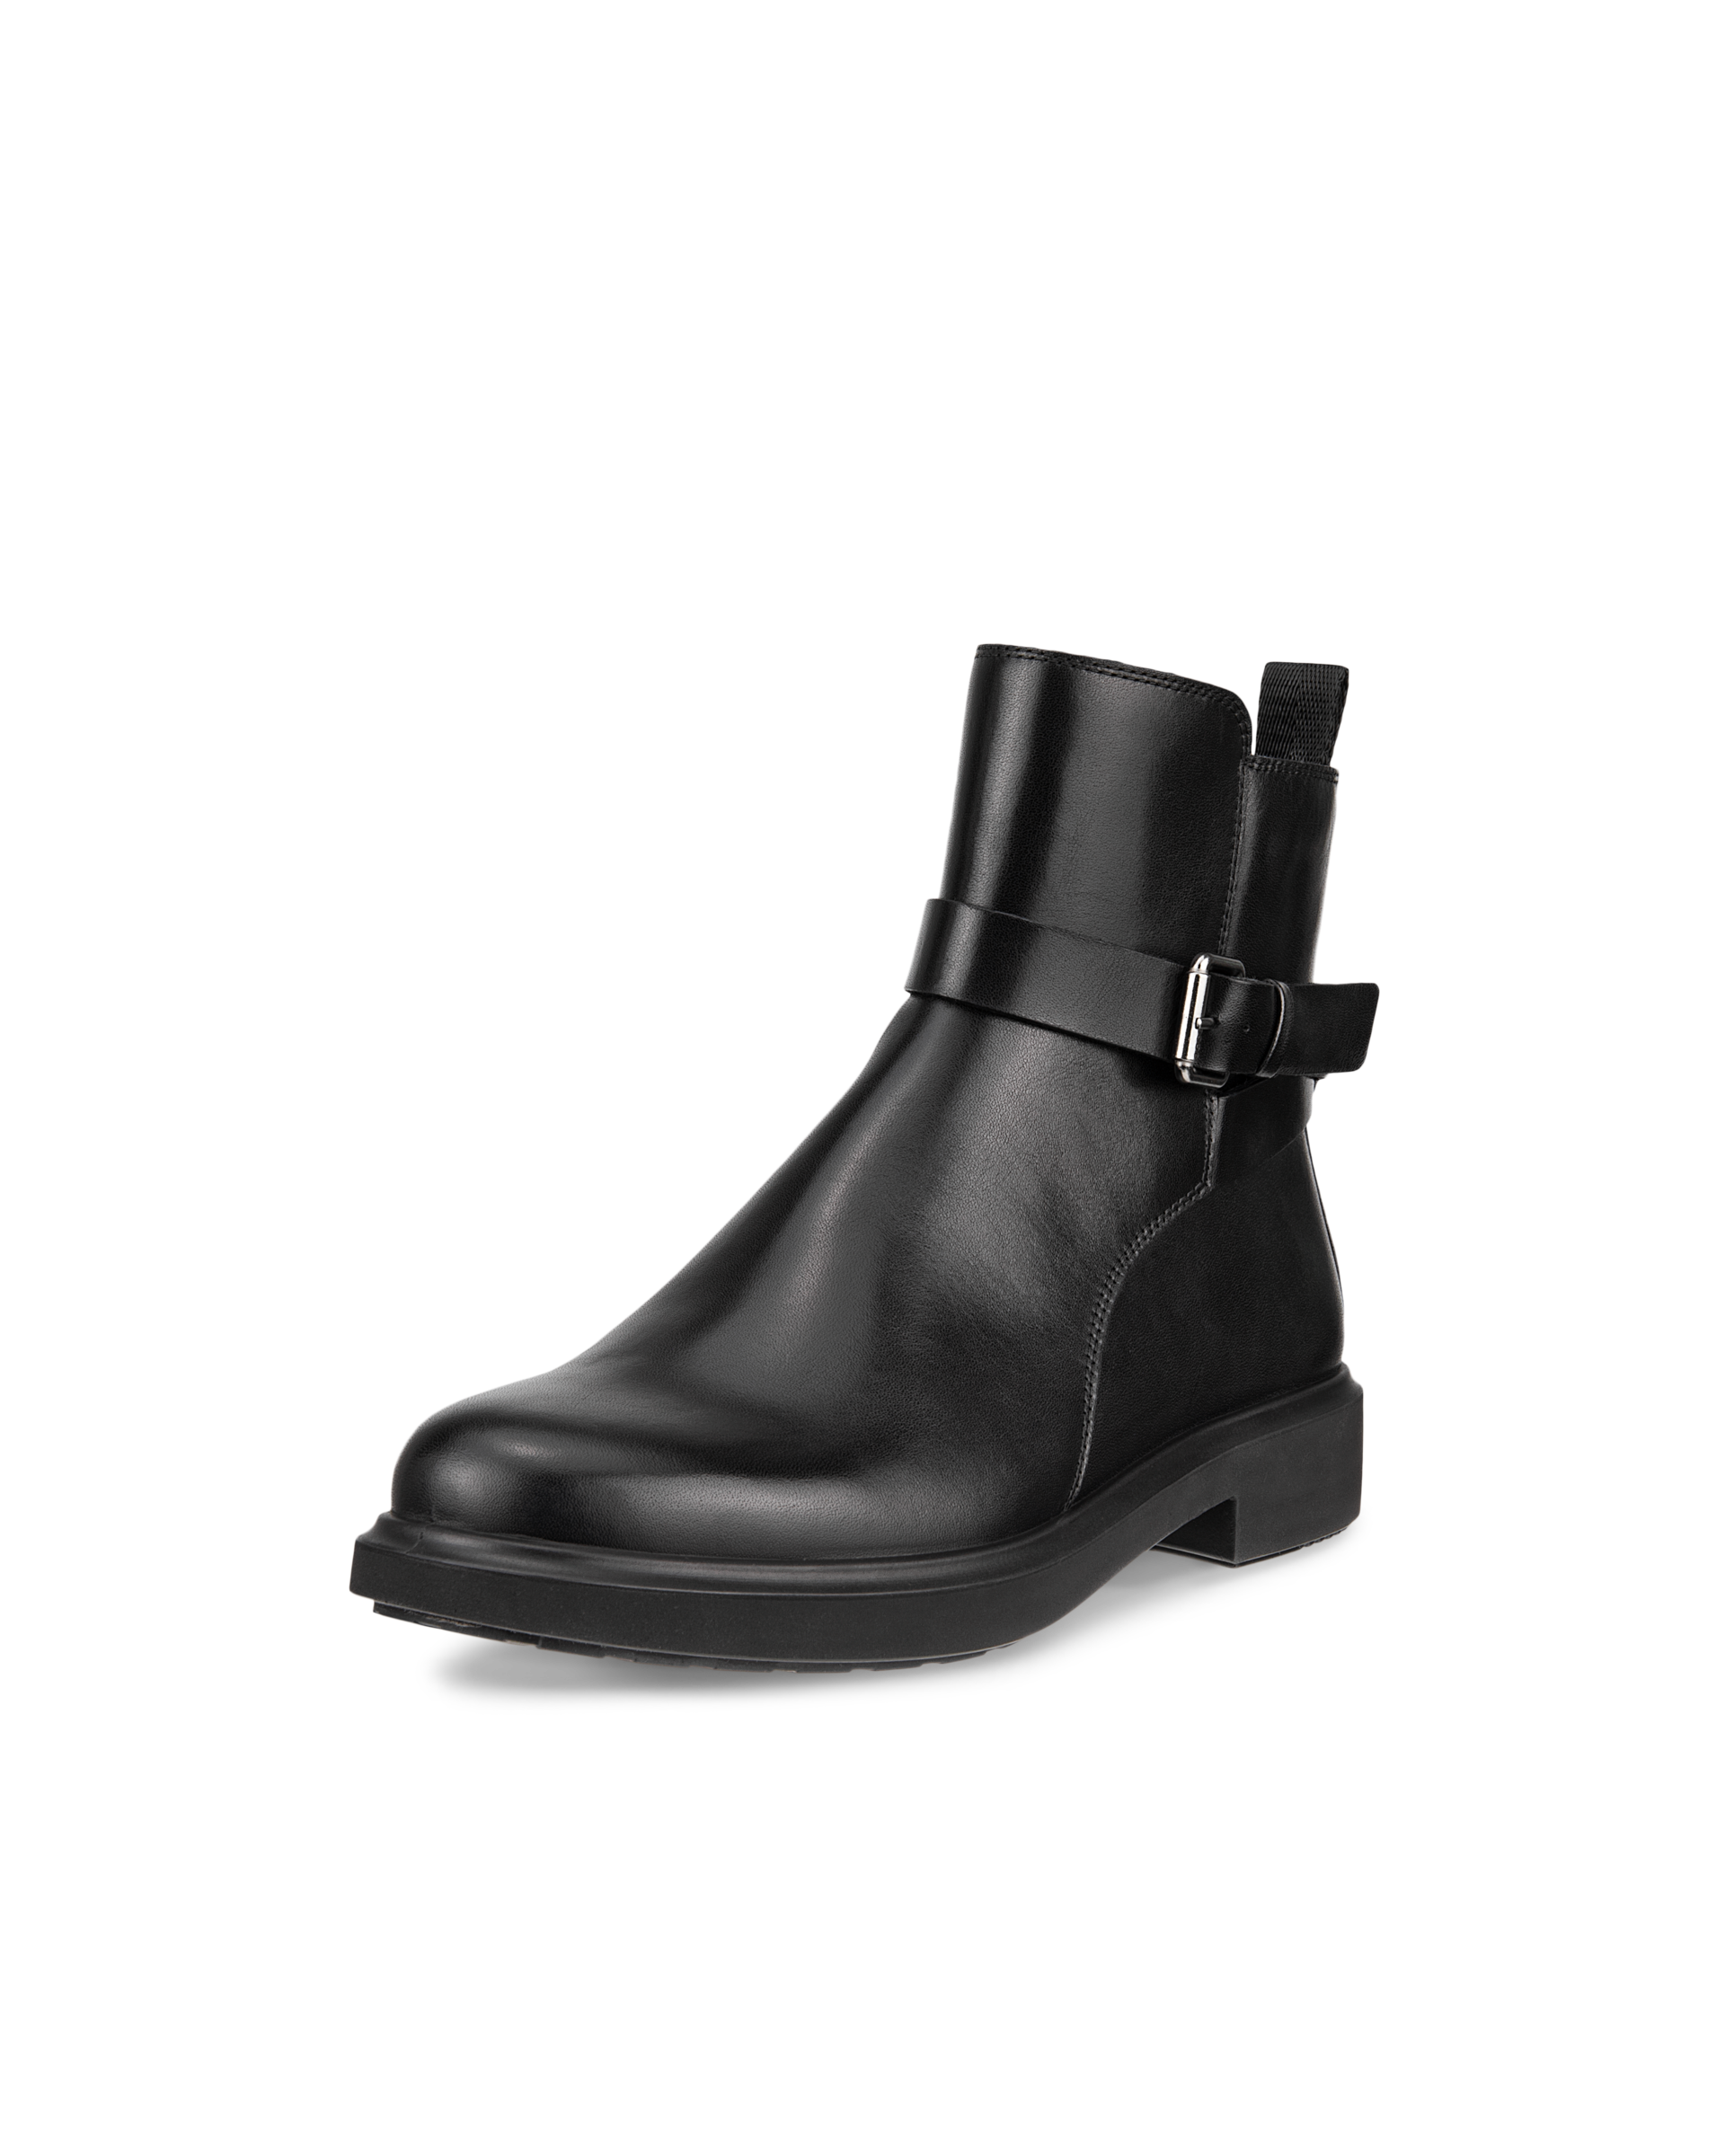 Shop for Women's Boots On Sale Now | ECCO®